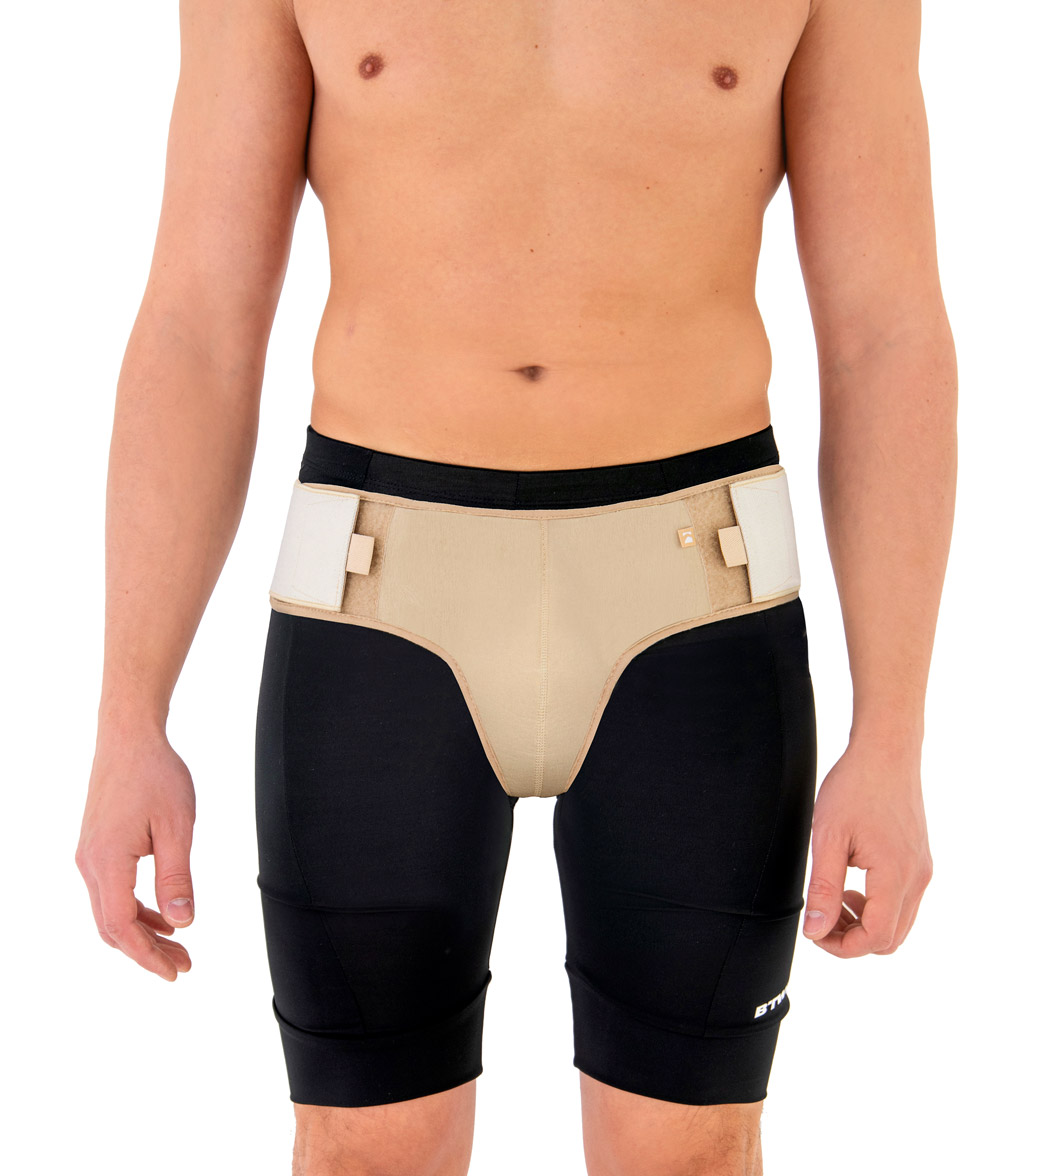 Umbilical hernia belt AM-PPB-01  Reh4Mat – lower limb orthosis and braces  - Manufacturer of modern orthopaedic devices